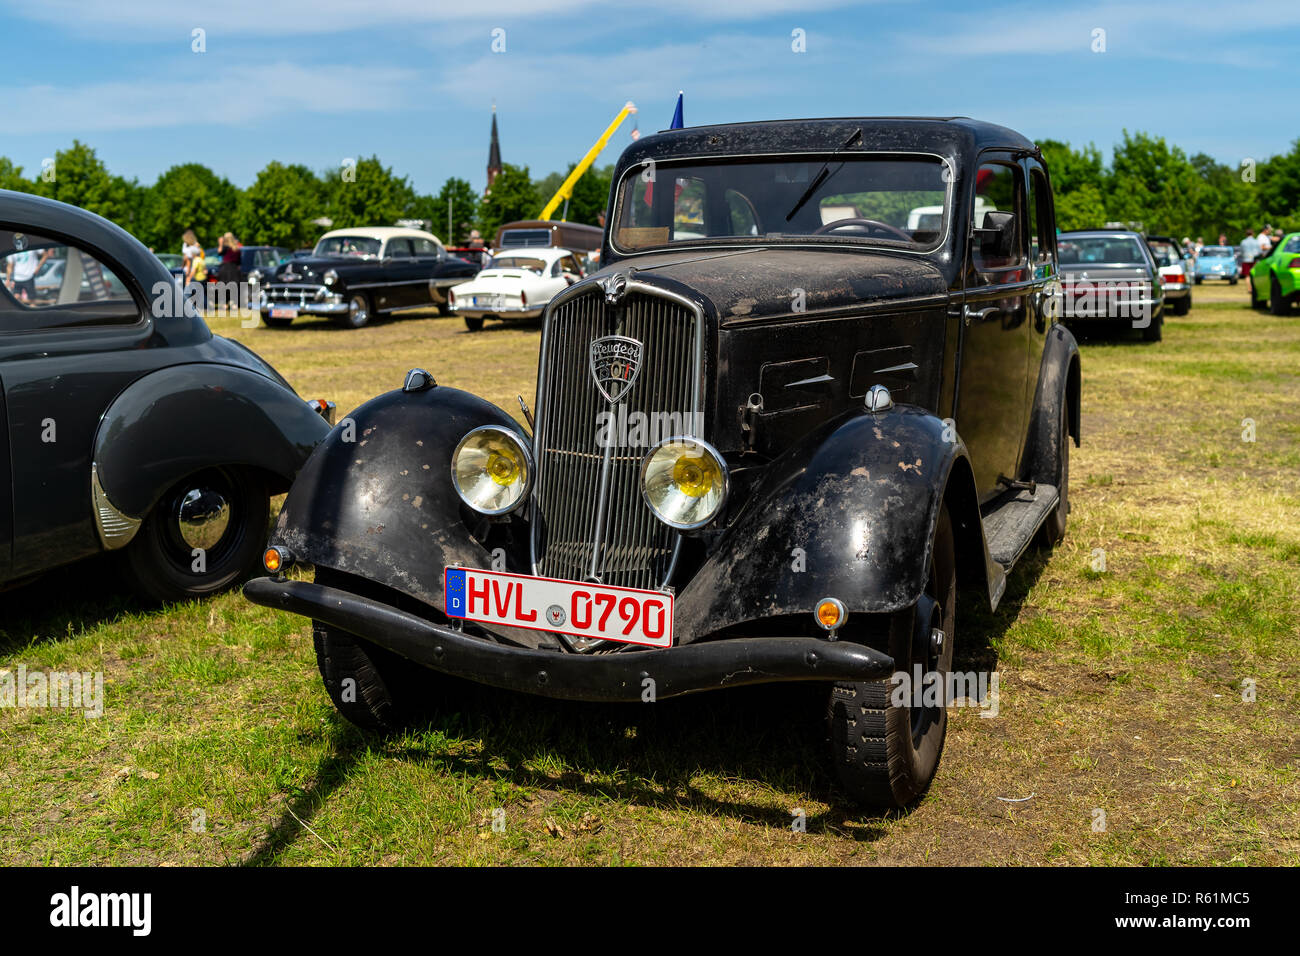 PAAREN IM GLIEN, GERMANY - MAY 19, 2018: Large family car Peugeot 301, 1932. Die Oldtimer Show 2018. Stock Photo